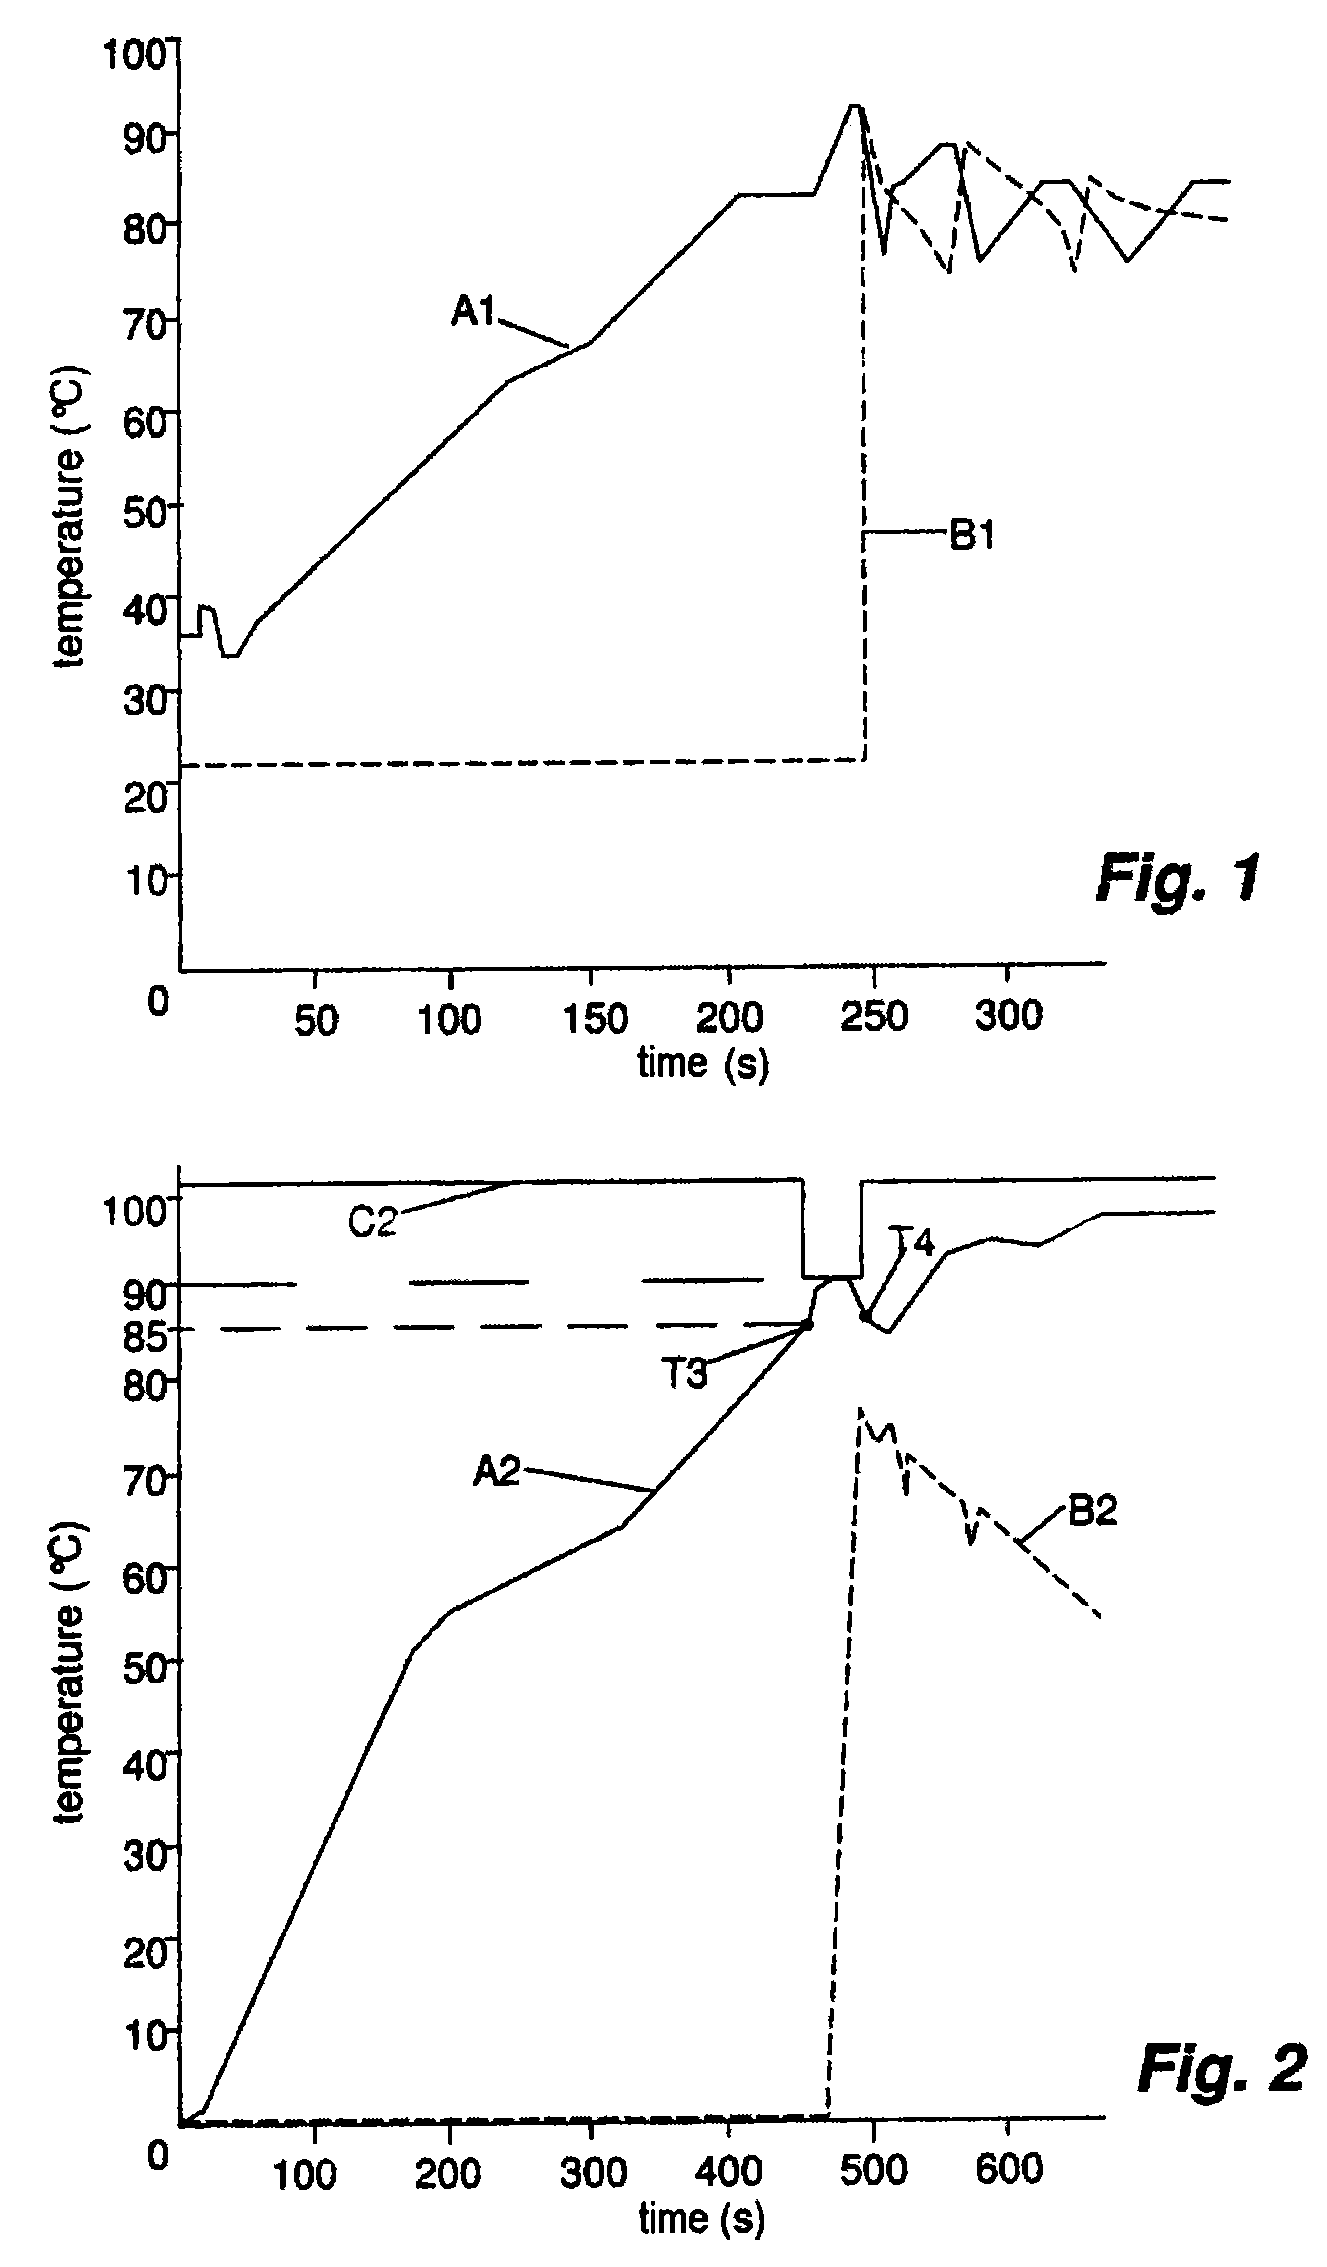 Method and device for controlling the initial opening of a thermostat regulating the temperature of an internal combustion engine